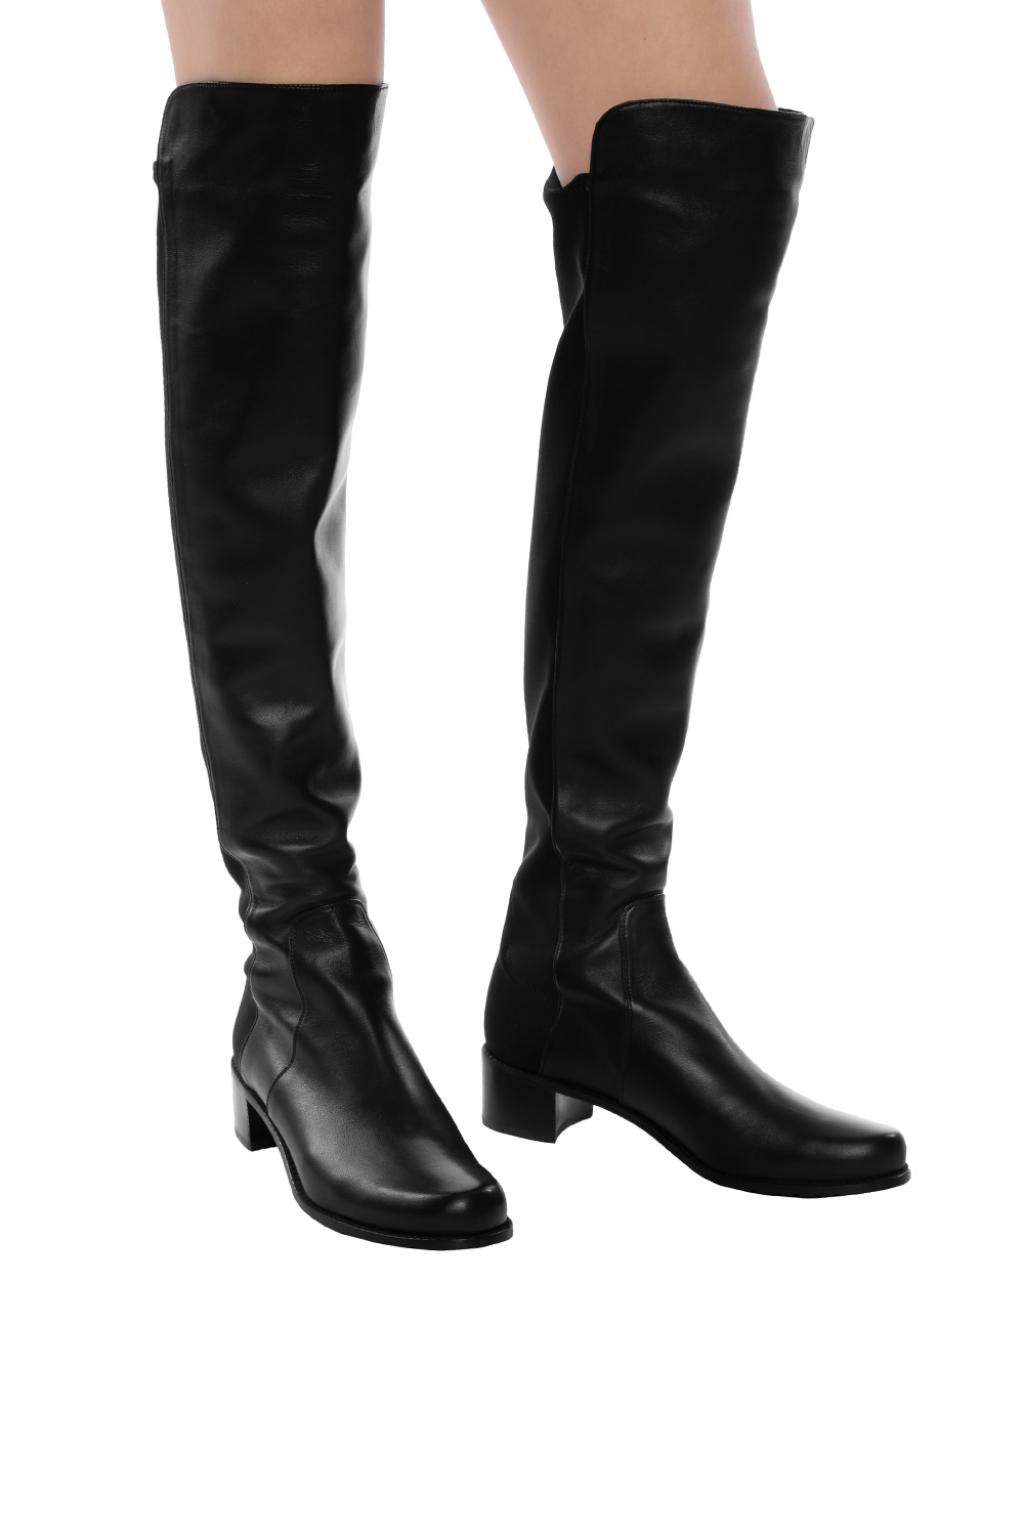 reserve over the knee boot